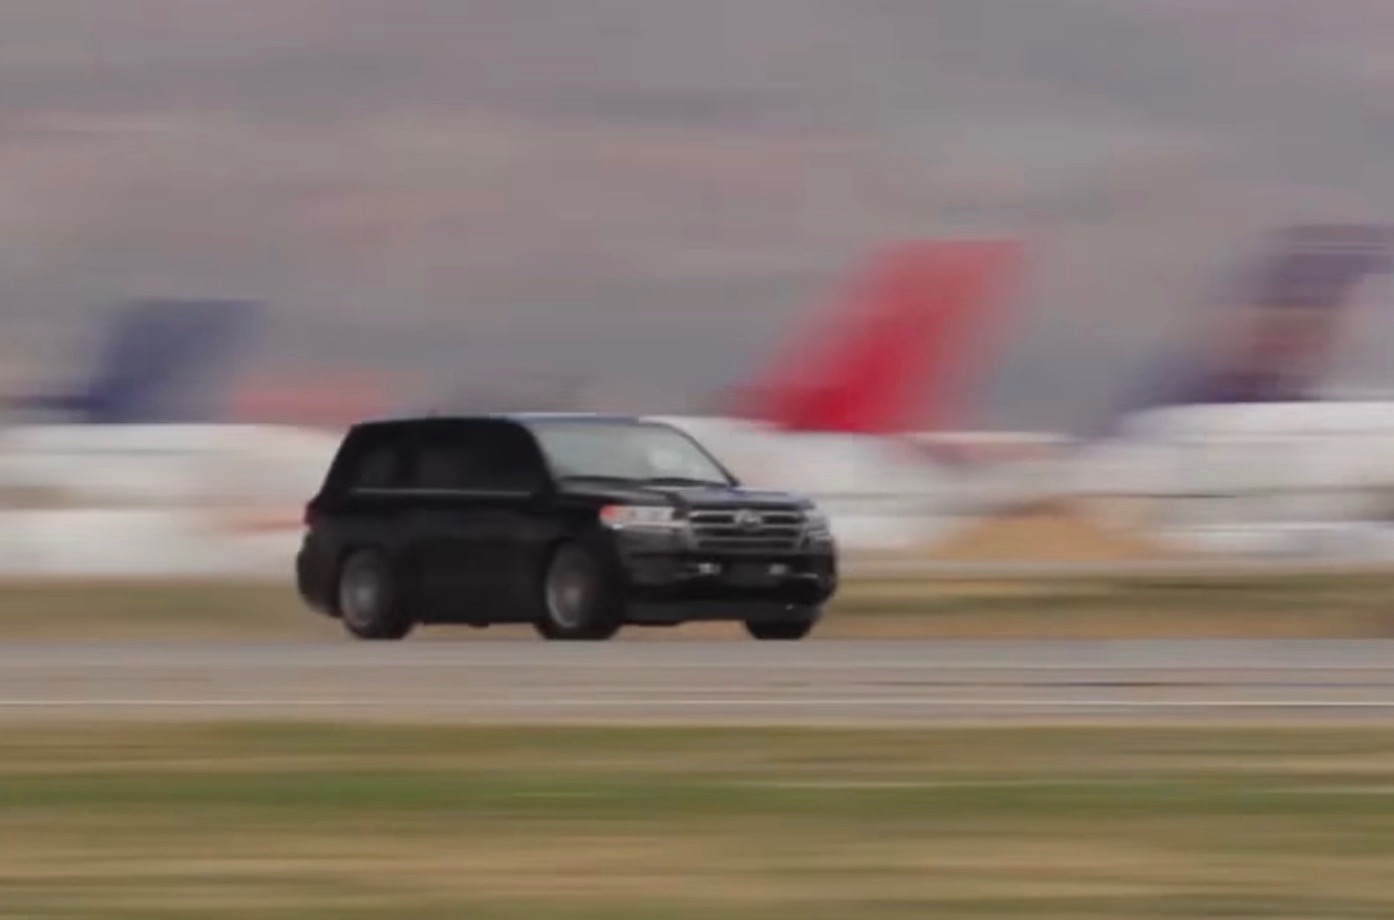 2000hp Toyota LandCruiser tops out at 370km/h, fastest in the world (video)